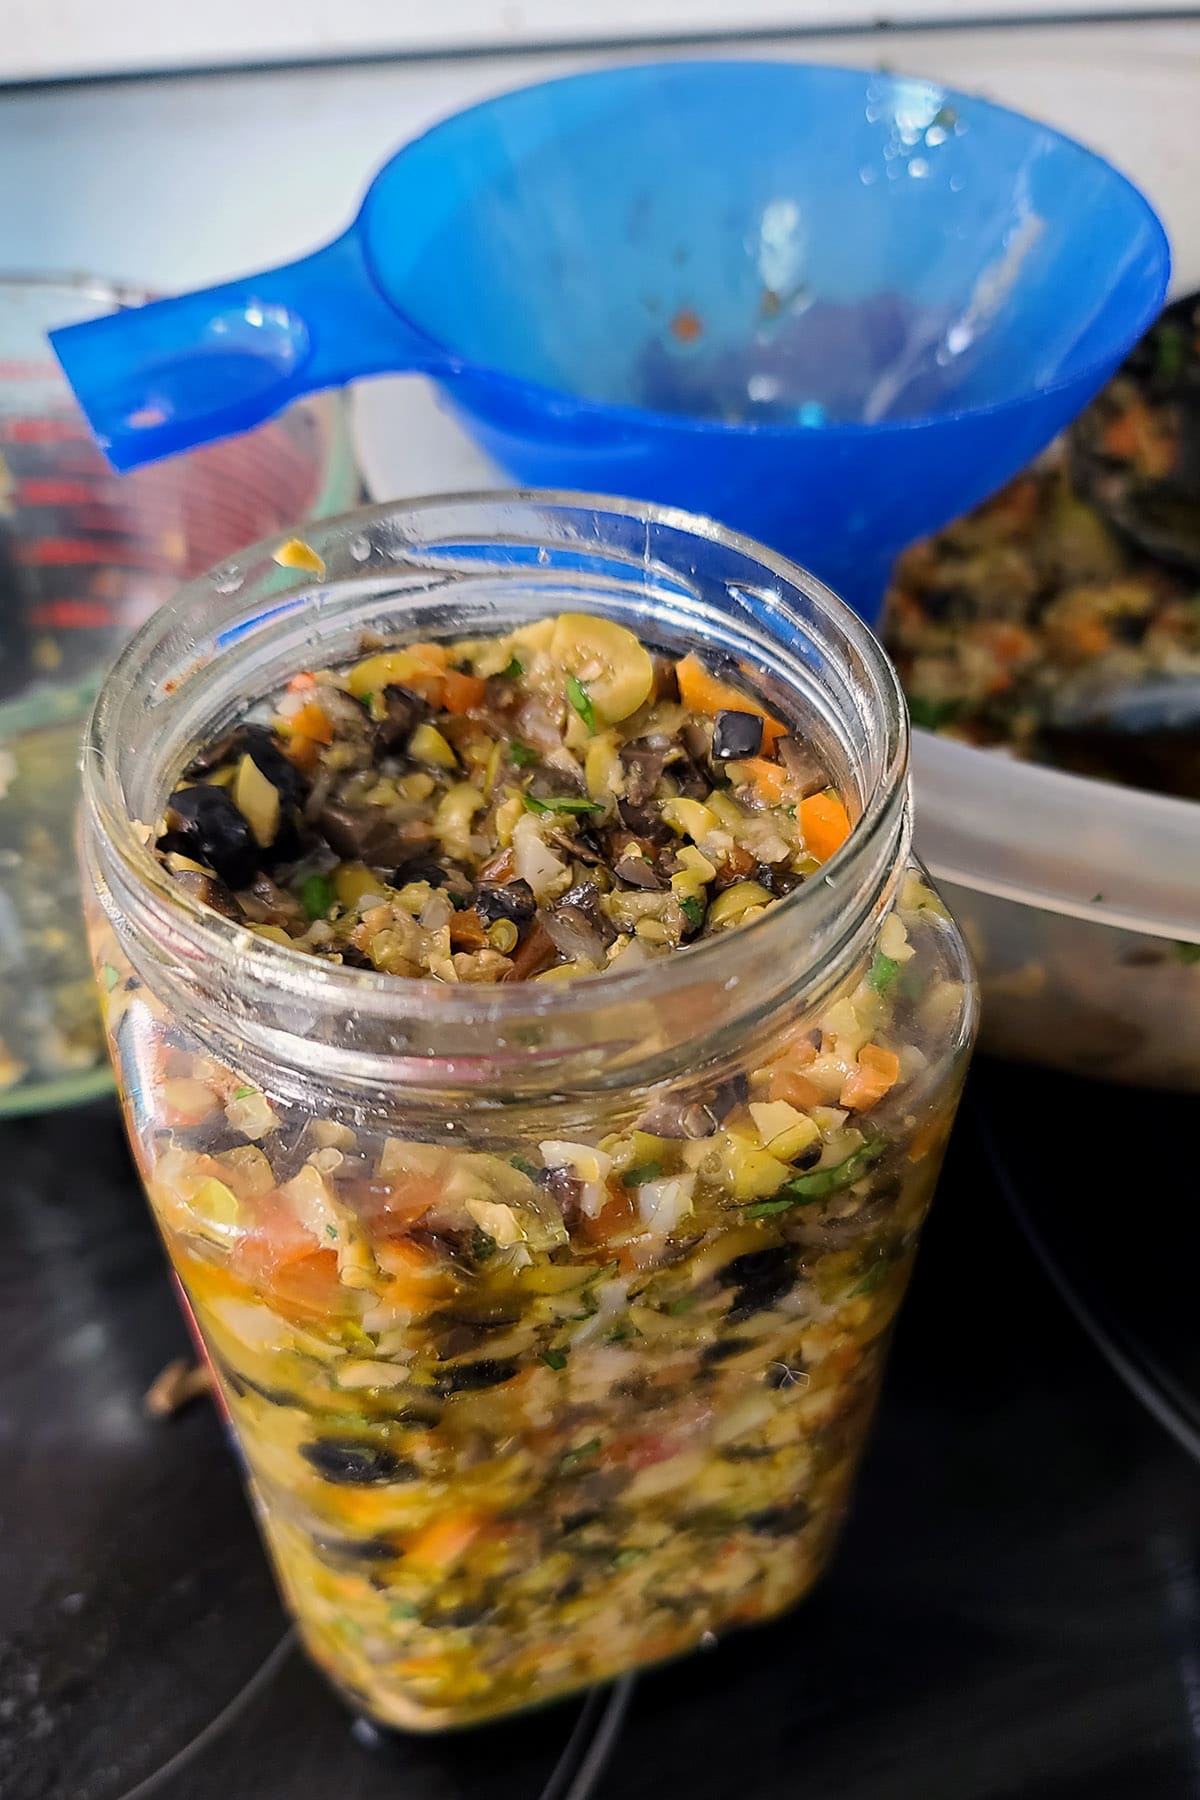 A large glass jar filled with olive salad, a funnel in the background.